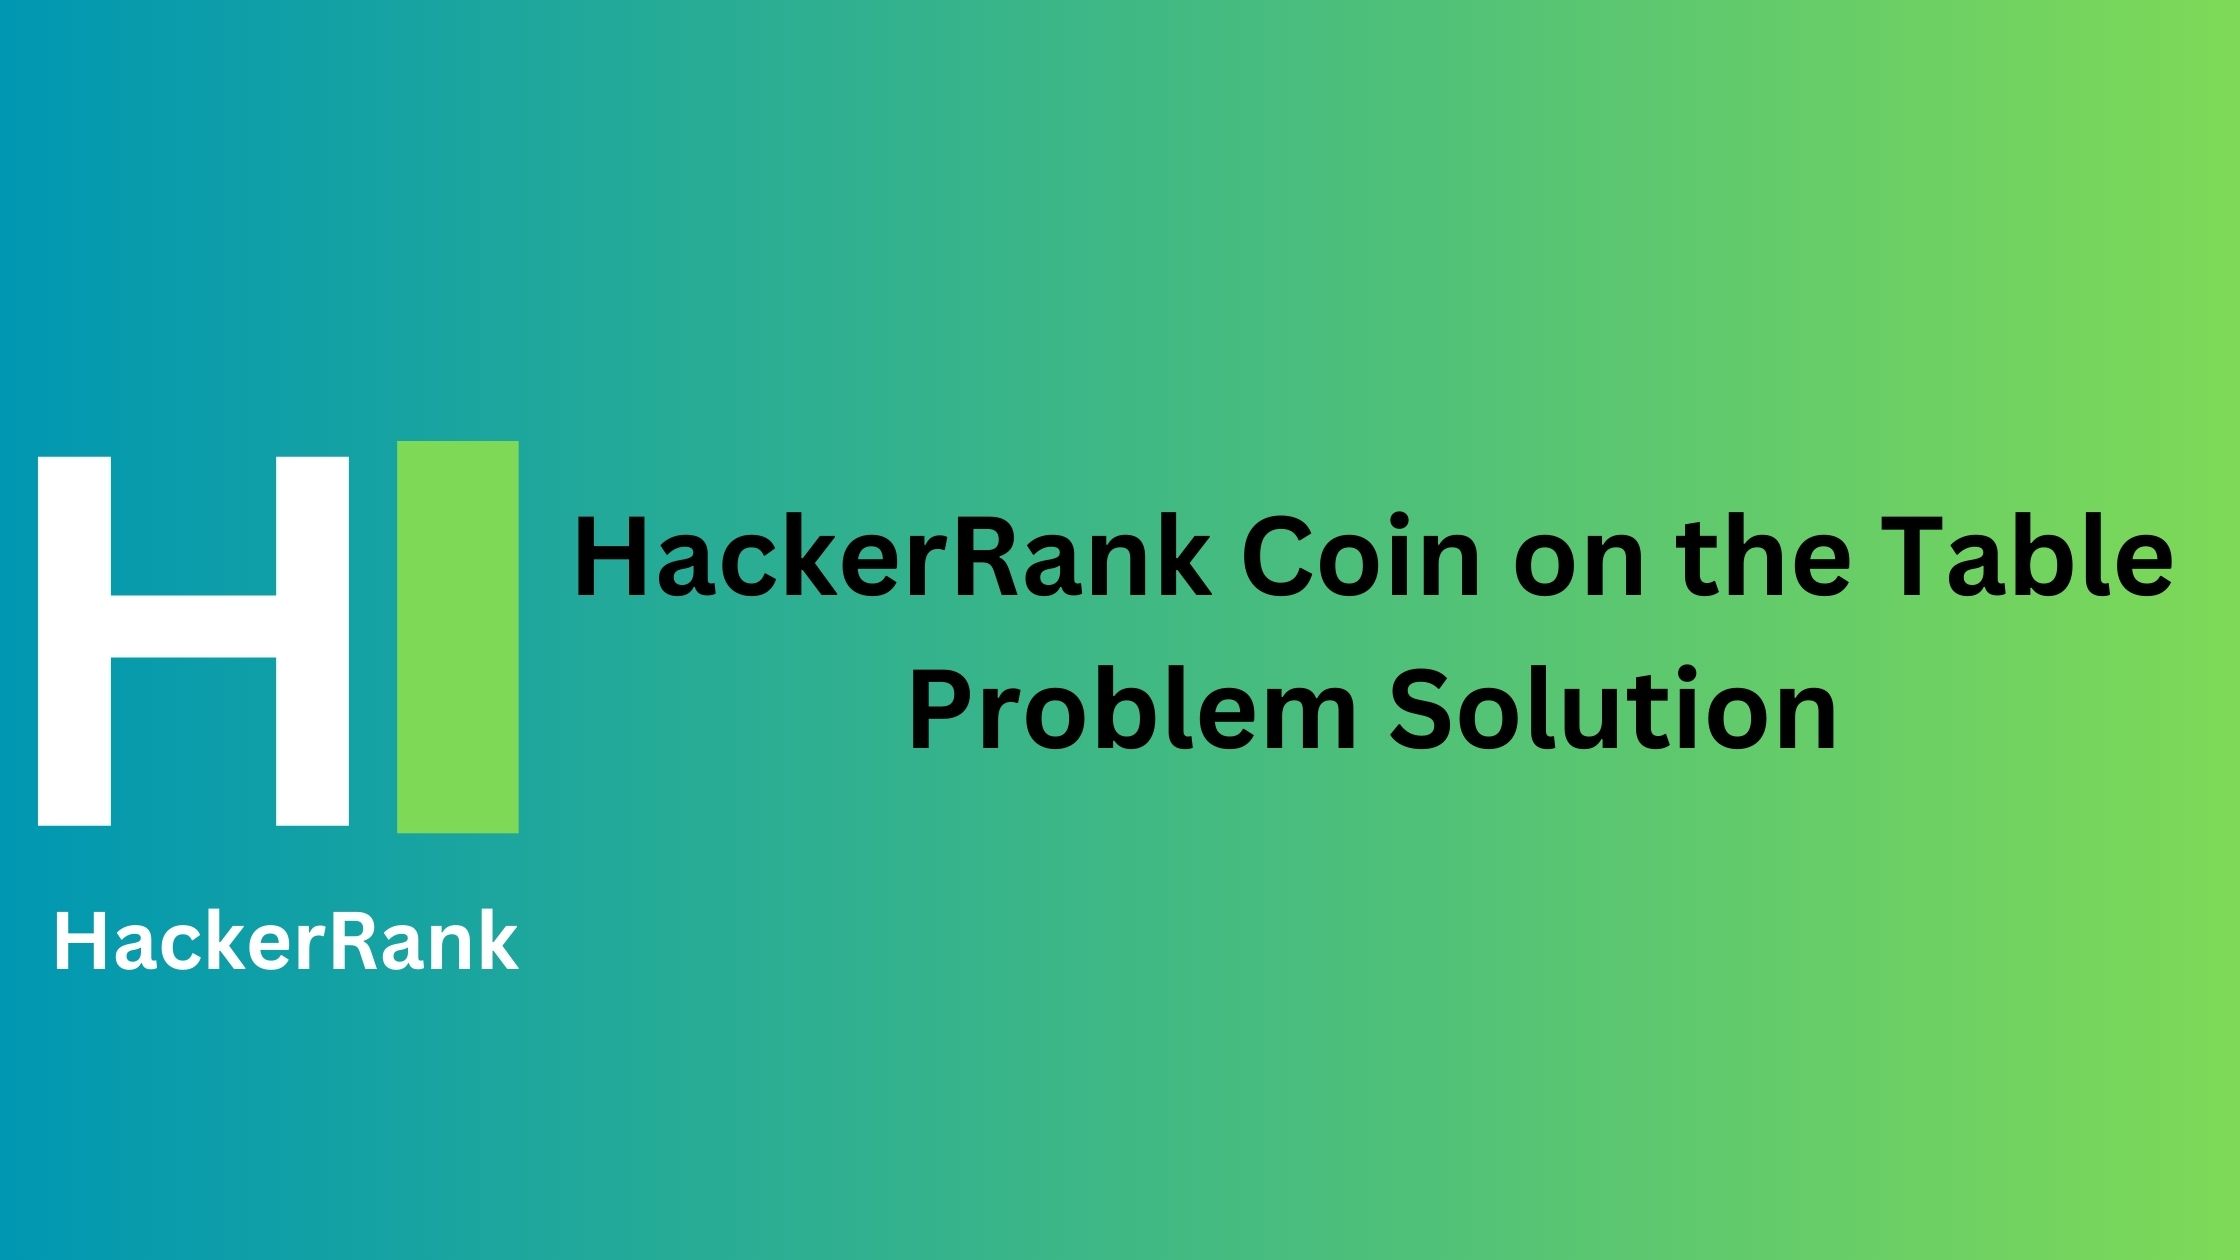 HackerRank Coin on the Table Problem Solution